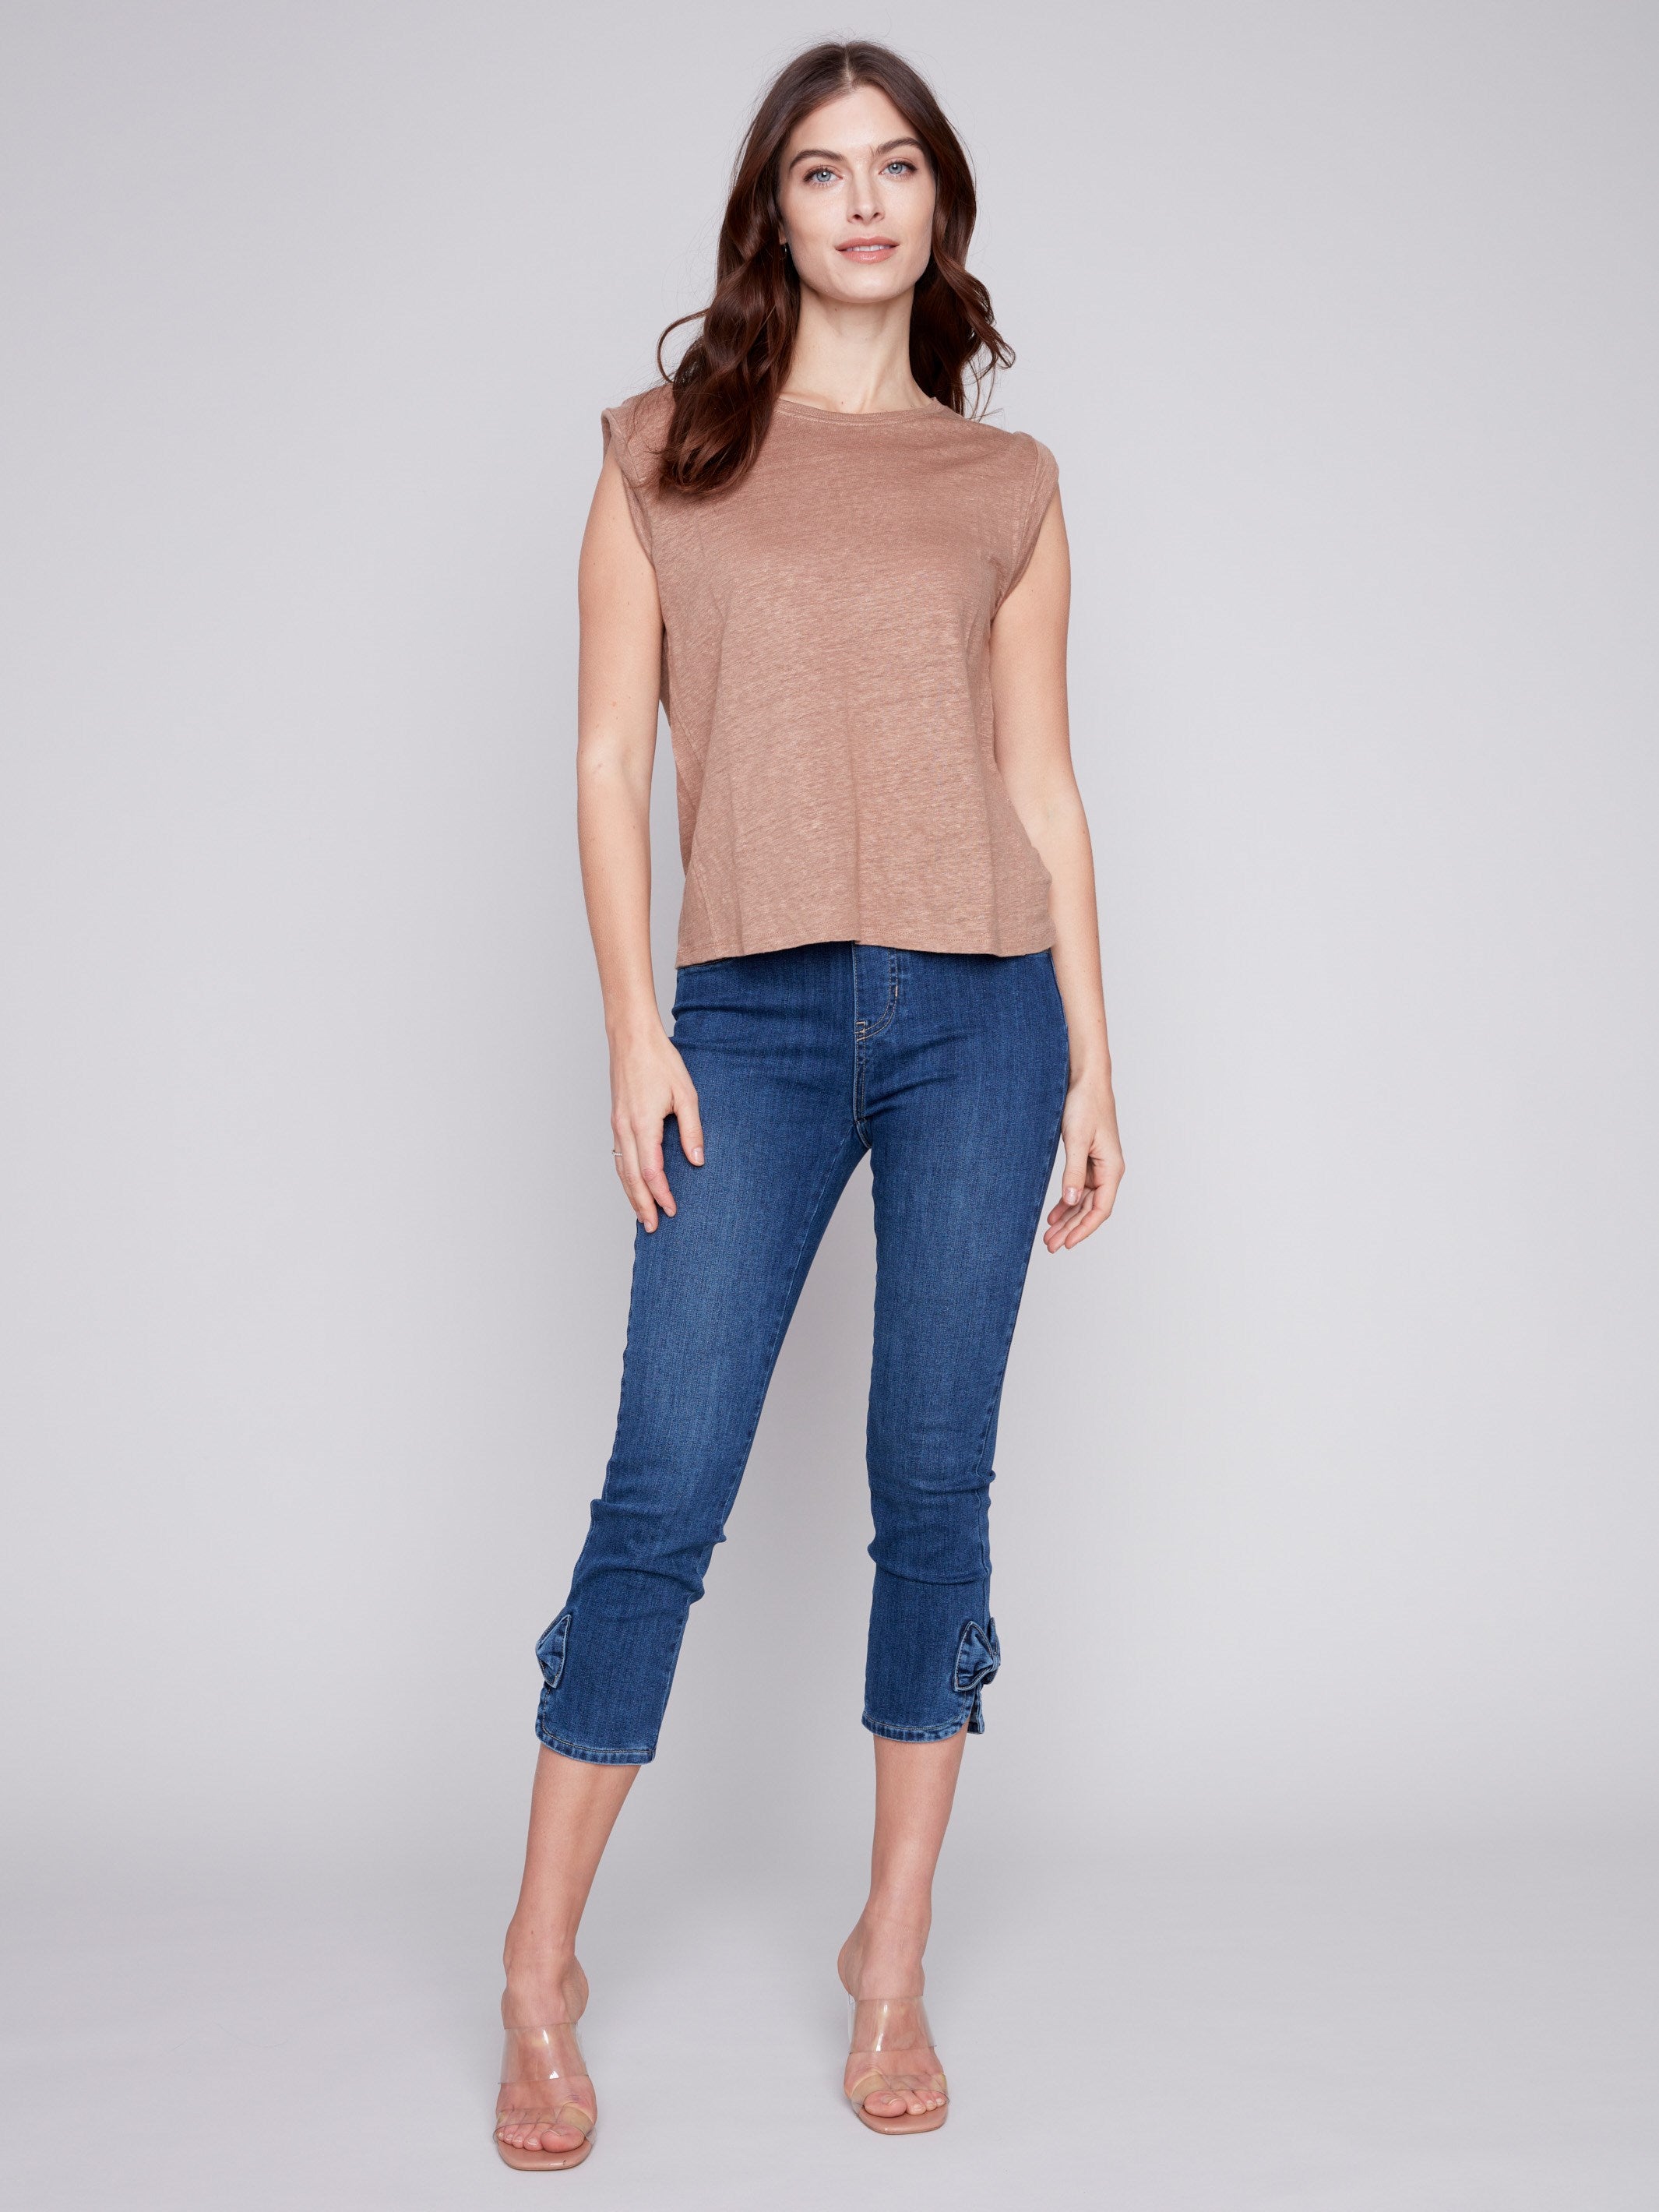 Charlie B Linen Tank Top with Sleeve Detail - Caramel - Image 8